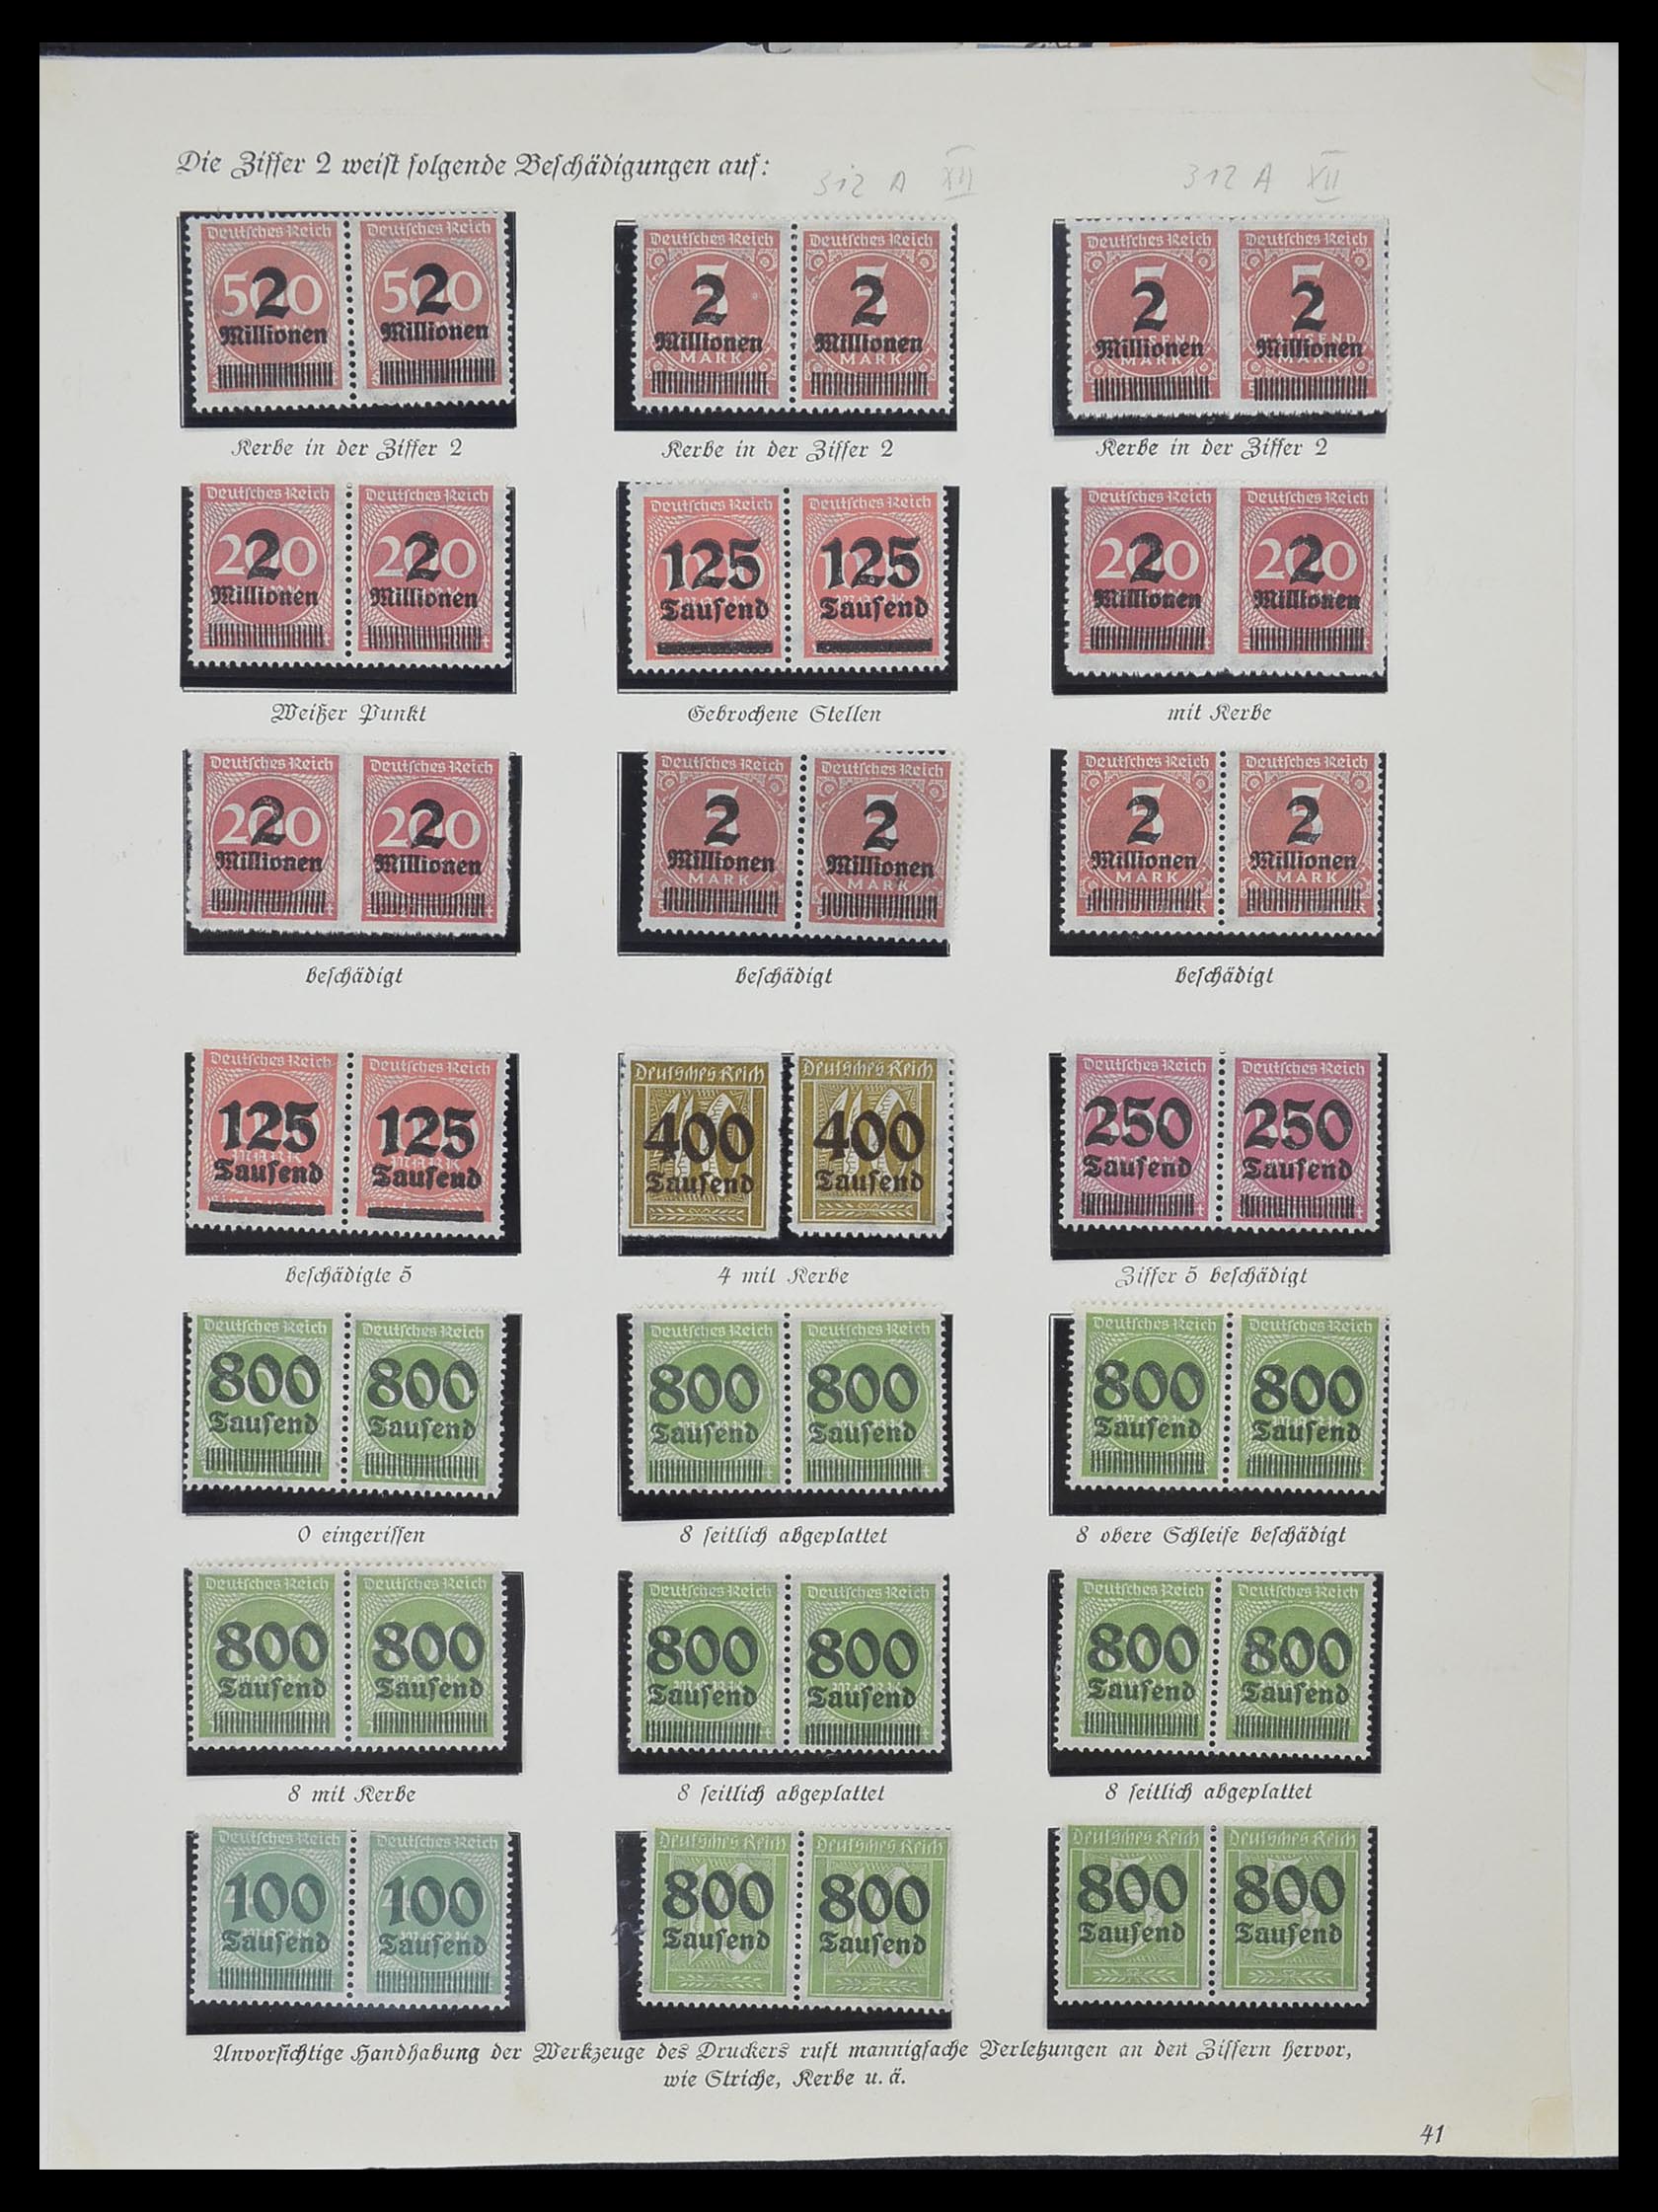 33957 018 - Stamp collection 33957 German Reich infla 1923.